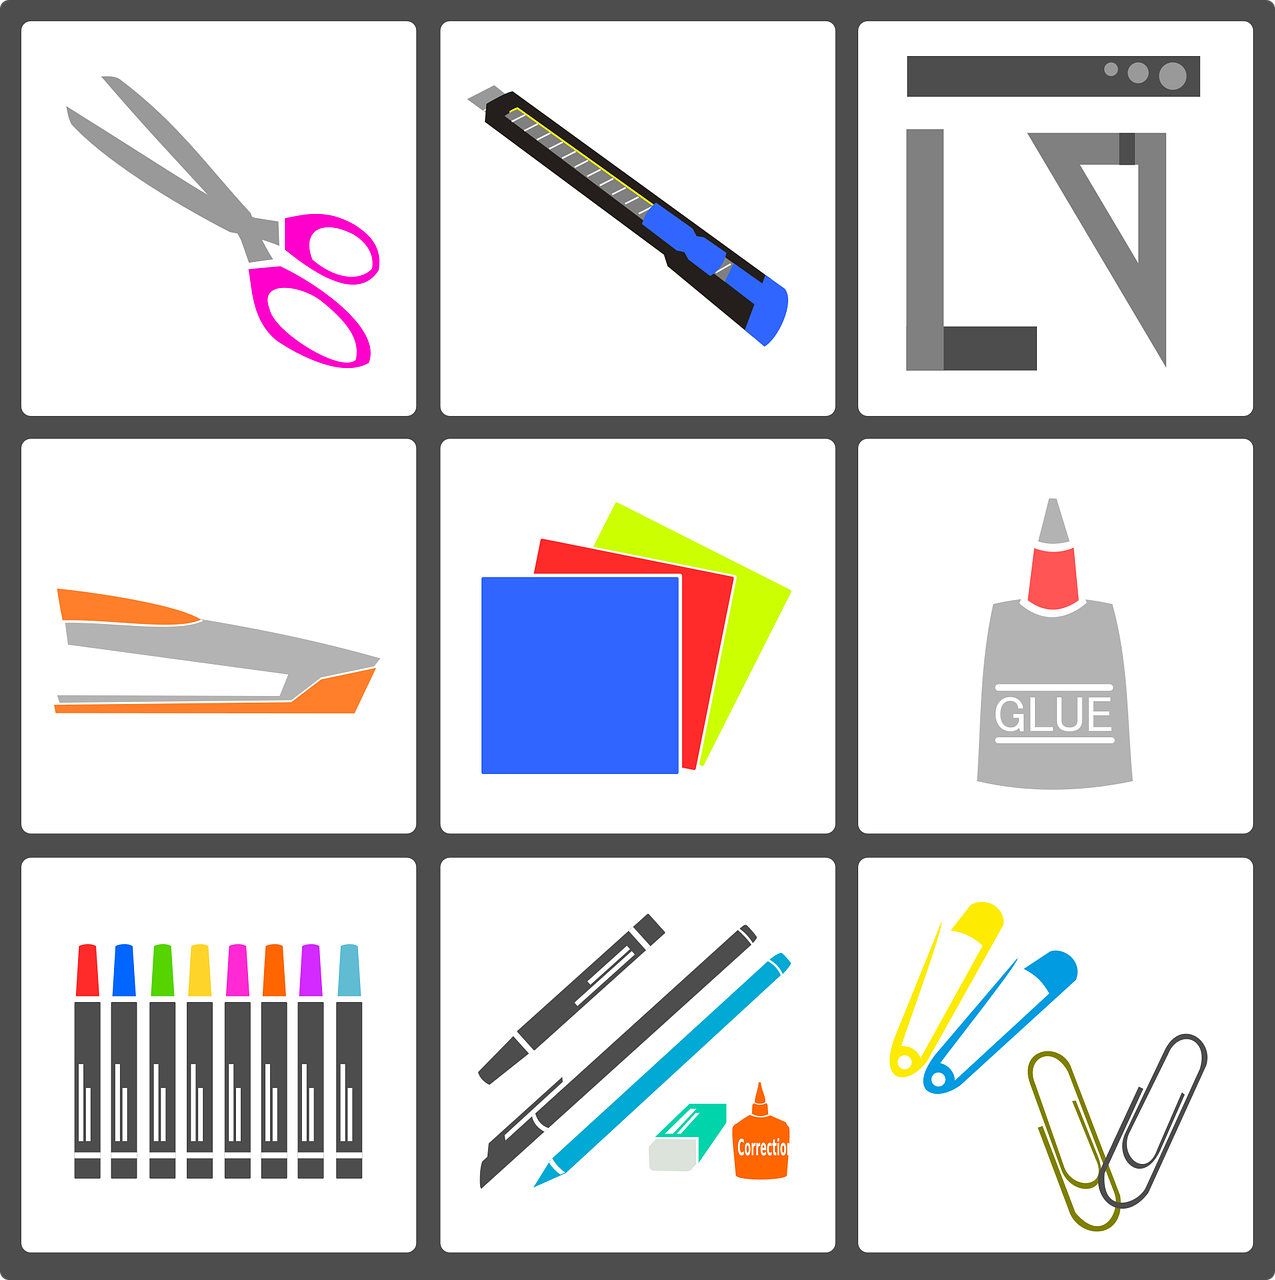 Graphic of various crafting supplies such as scissors, glue, markers, paper, and stapler